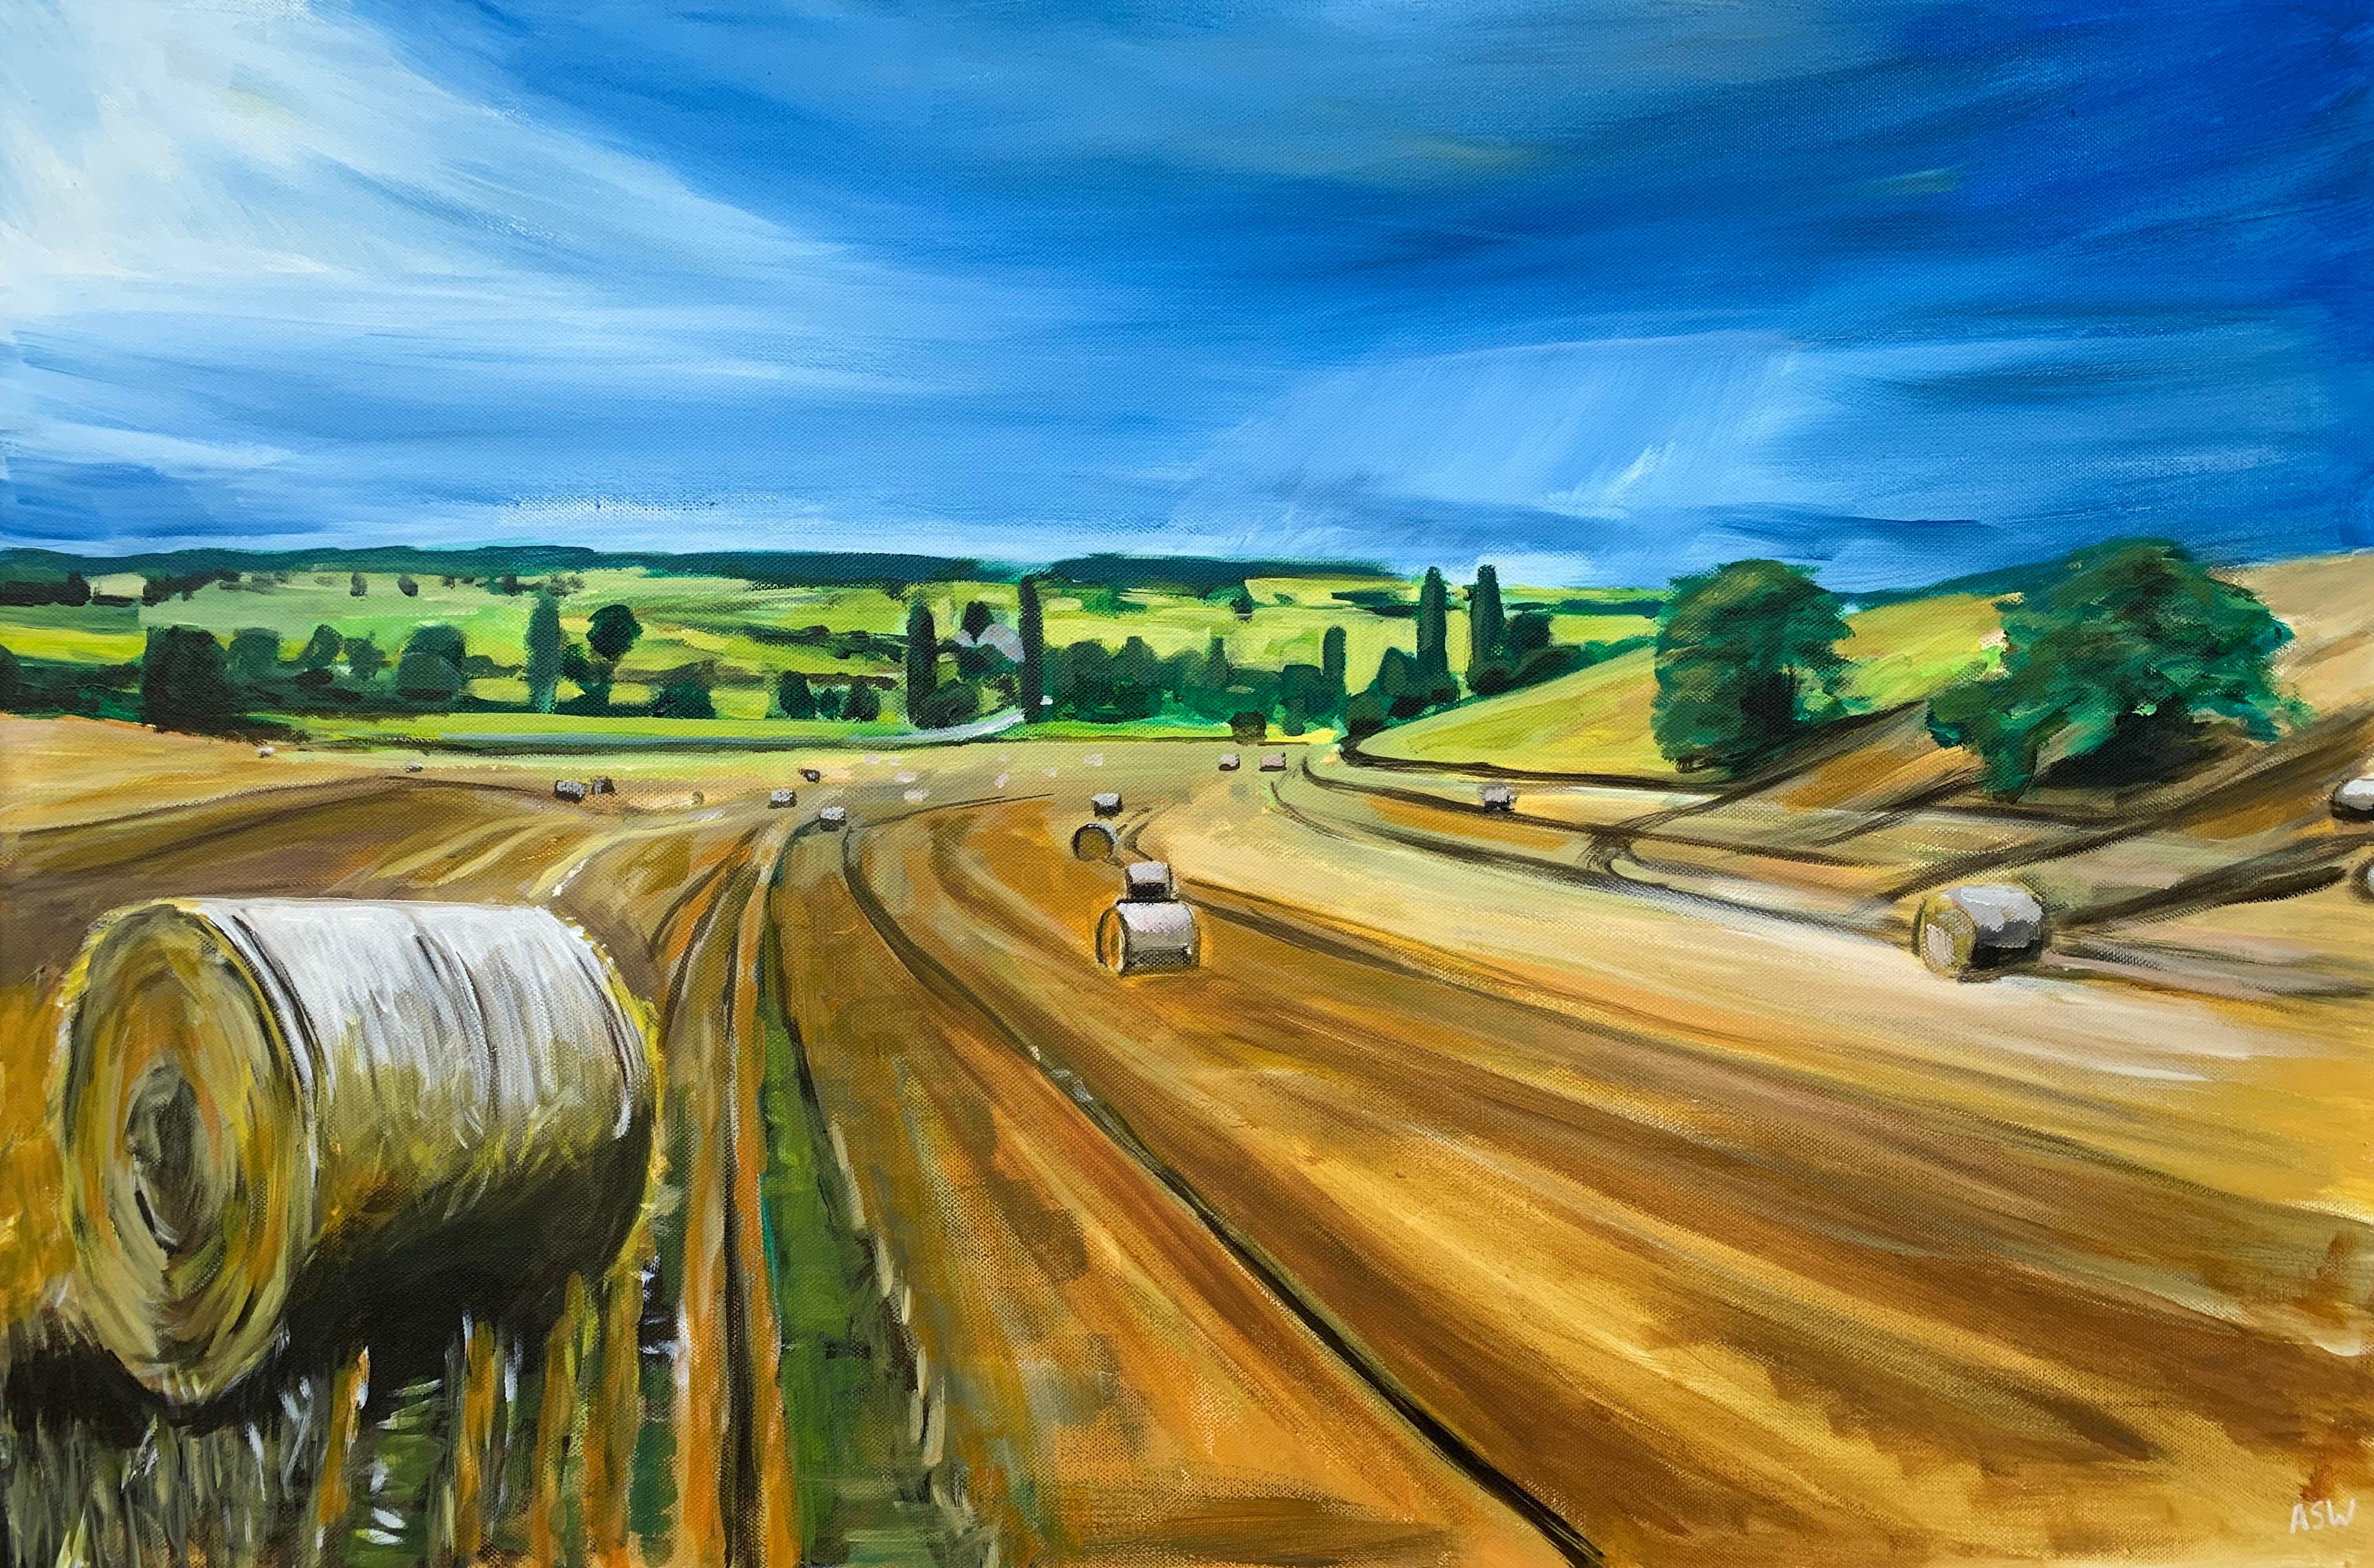 Original Painting of Wheat Field Harvest in Dordogne, France, by leading British Landscape Artist, Angela Wakefield. This is No.8 in Angela's European Series, entitled 'Dordogne Harvest'.

Art measures 30 x 20 inches
Frame measures 35 x 25